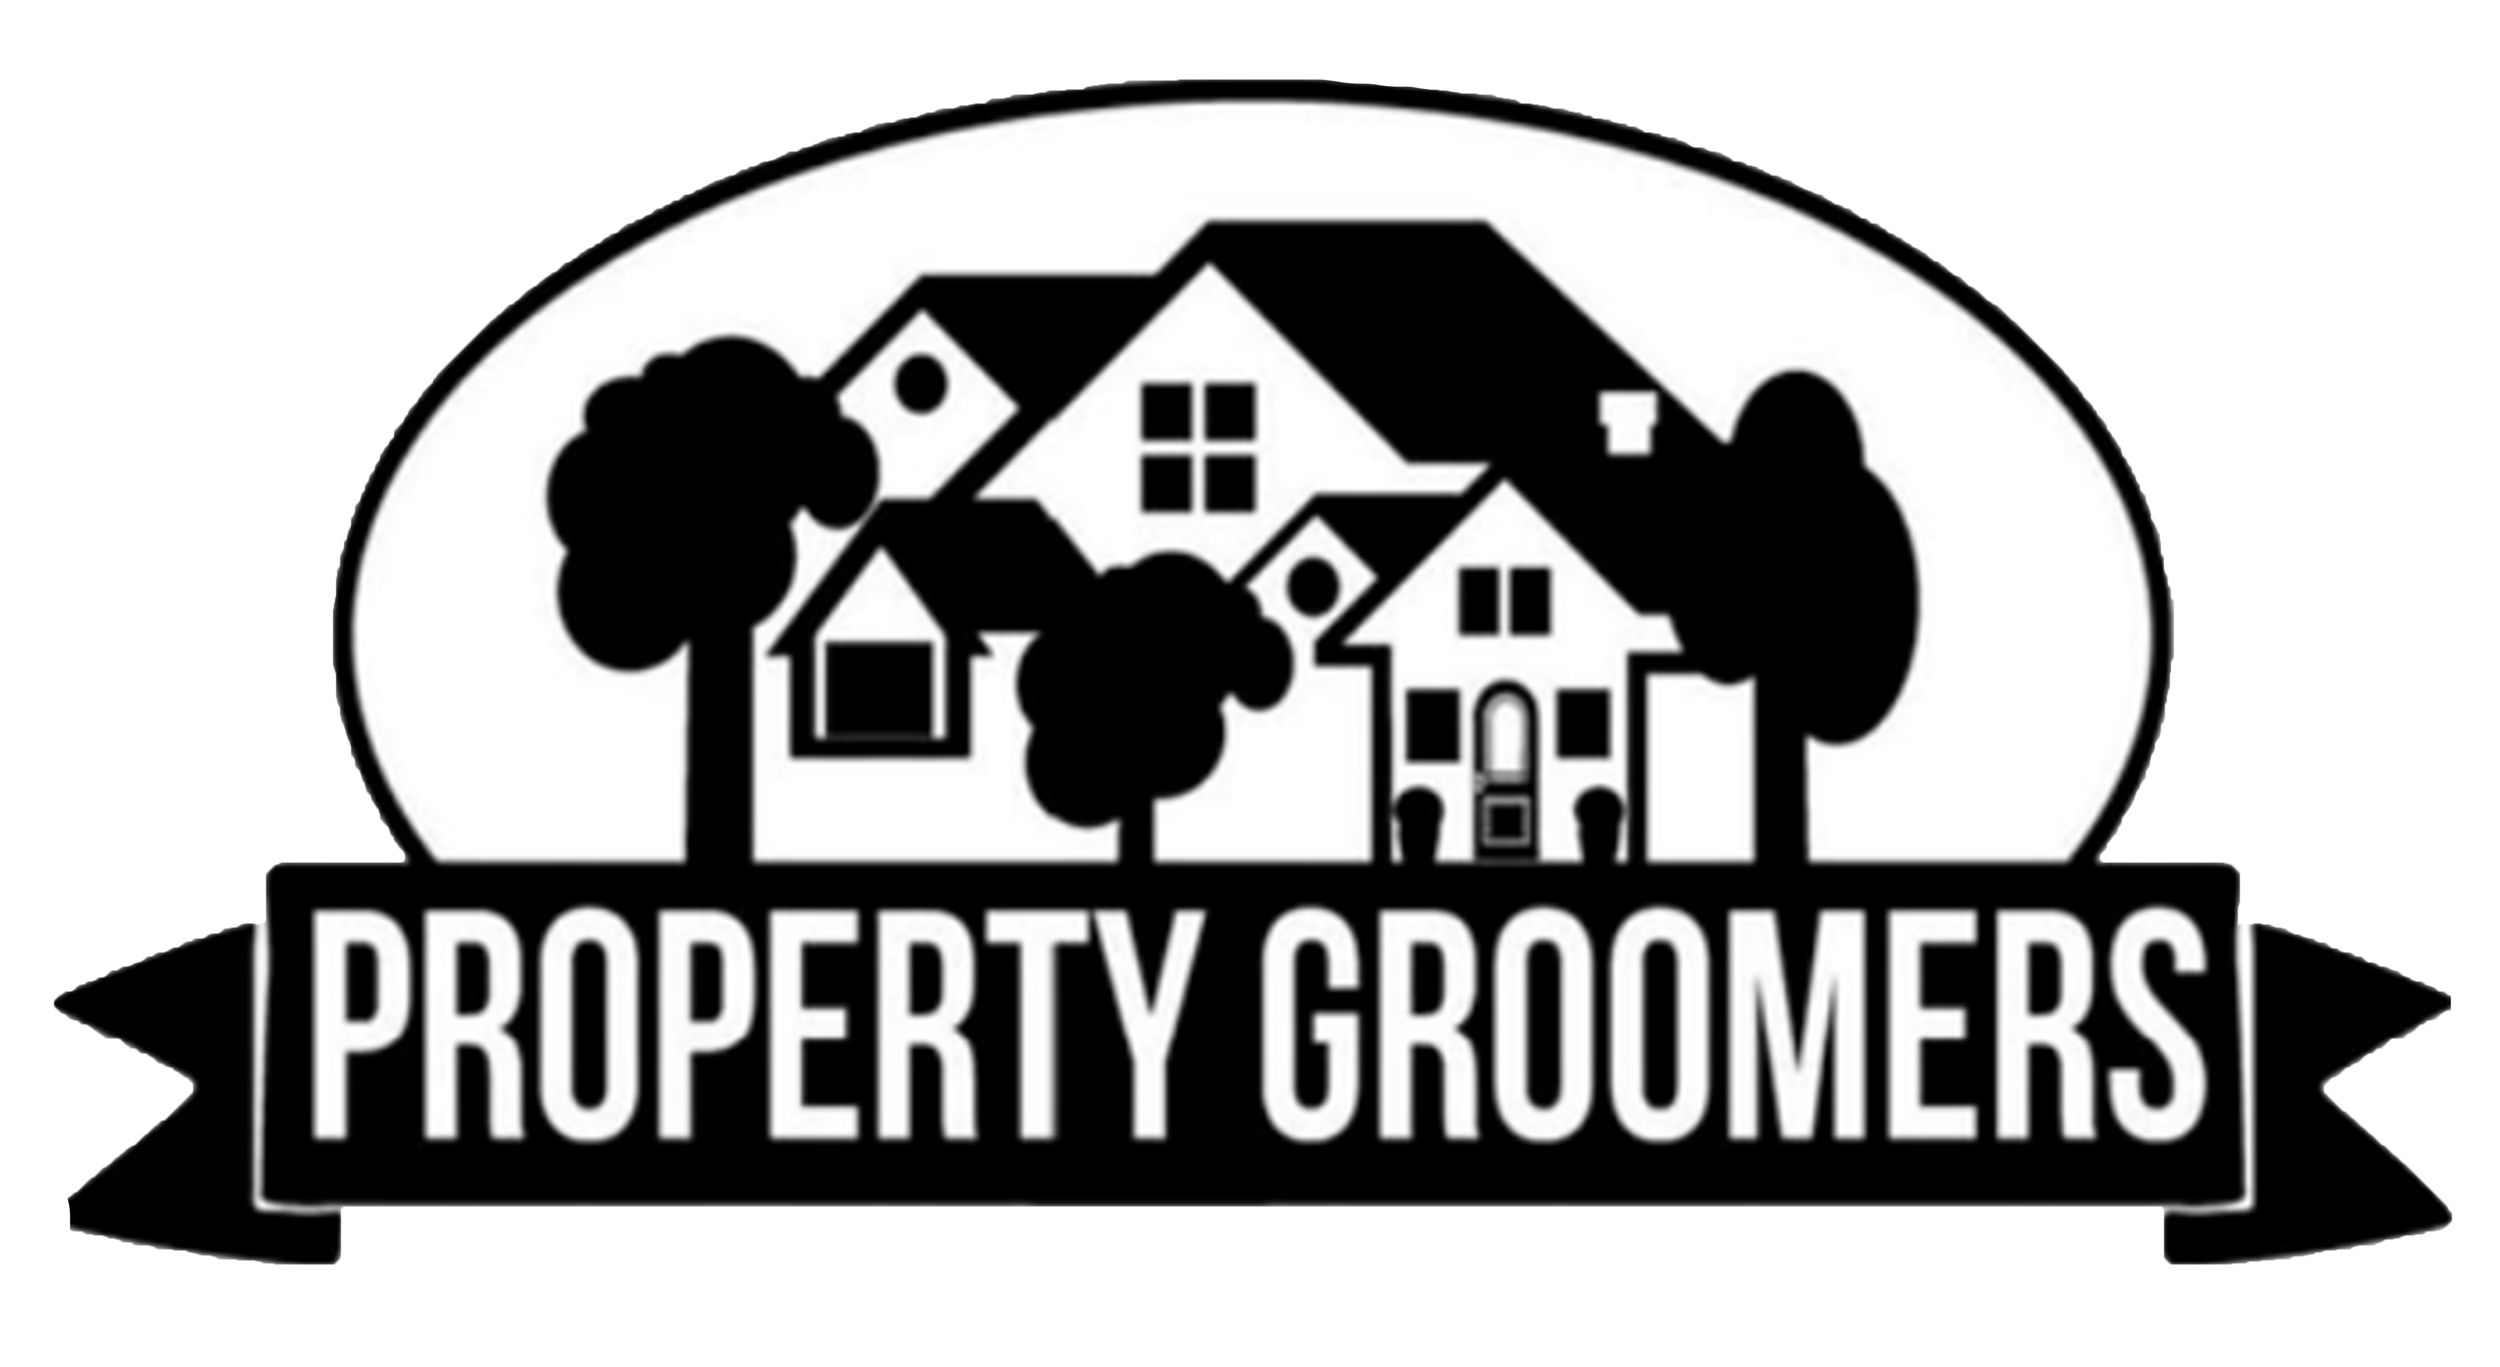 The Property Groomers